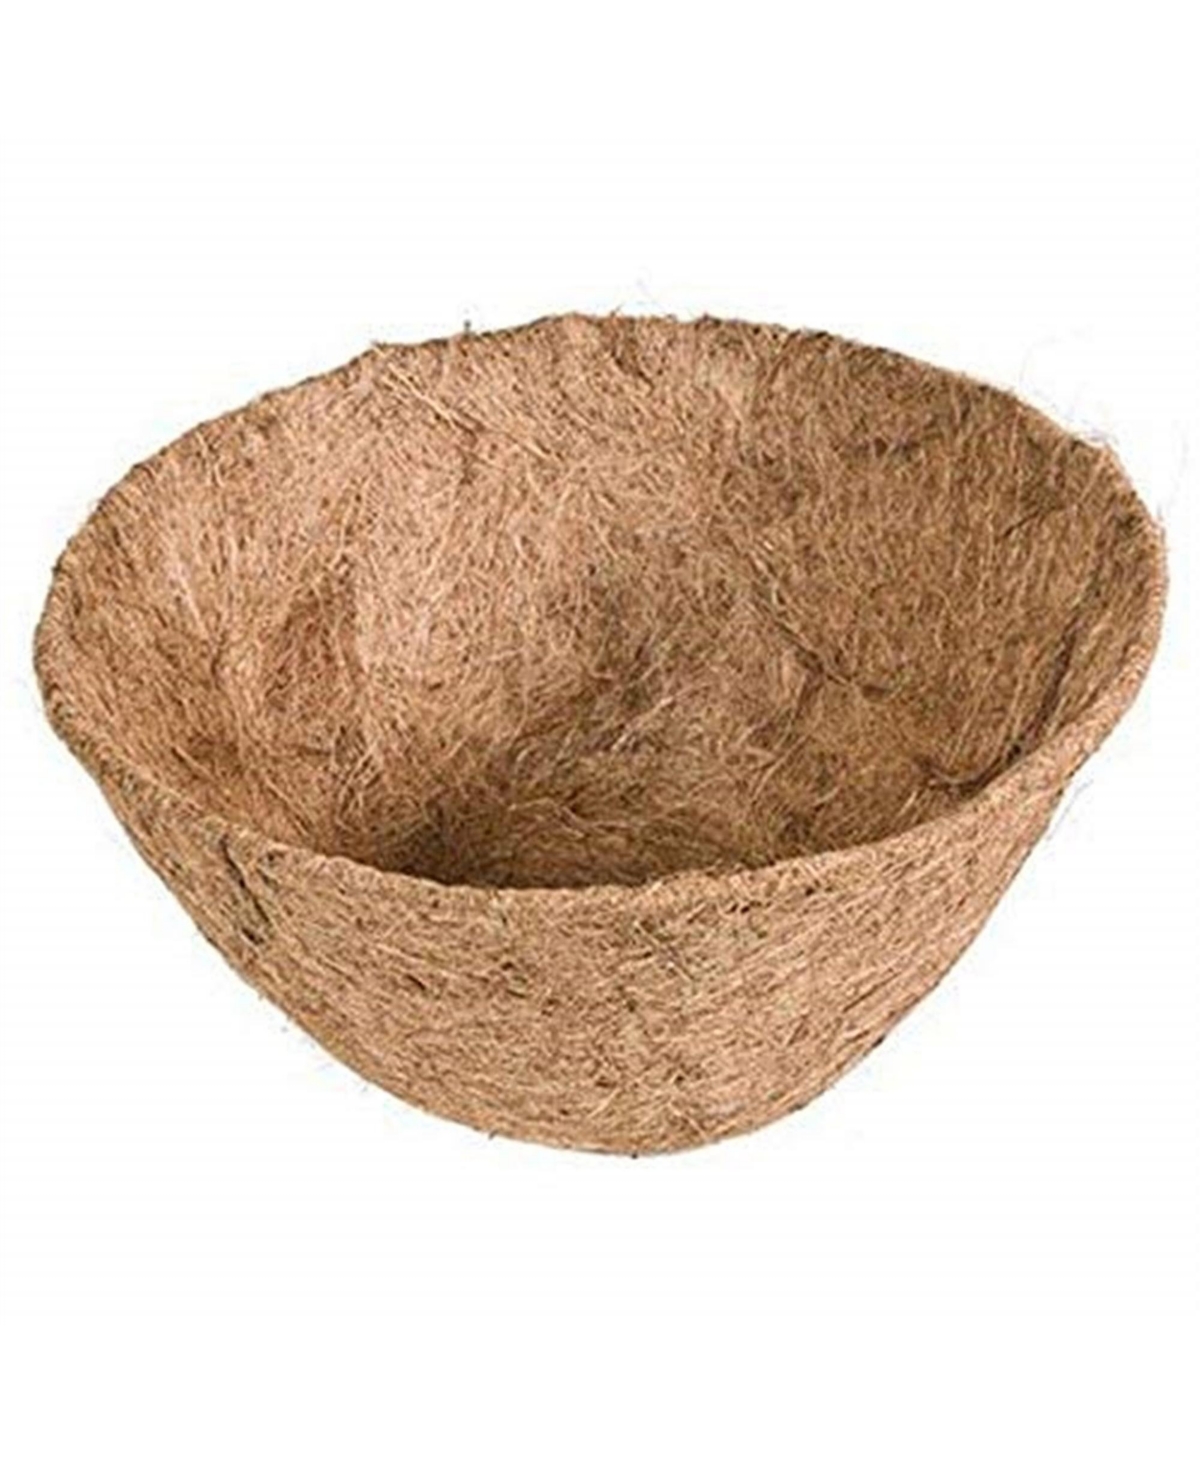 Products 88592 14-Inch Round Coco Fiber Liner, 1, Brown - Brown